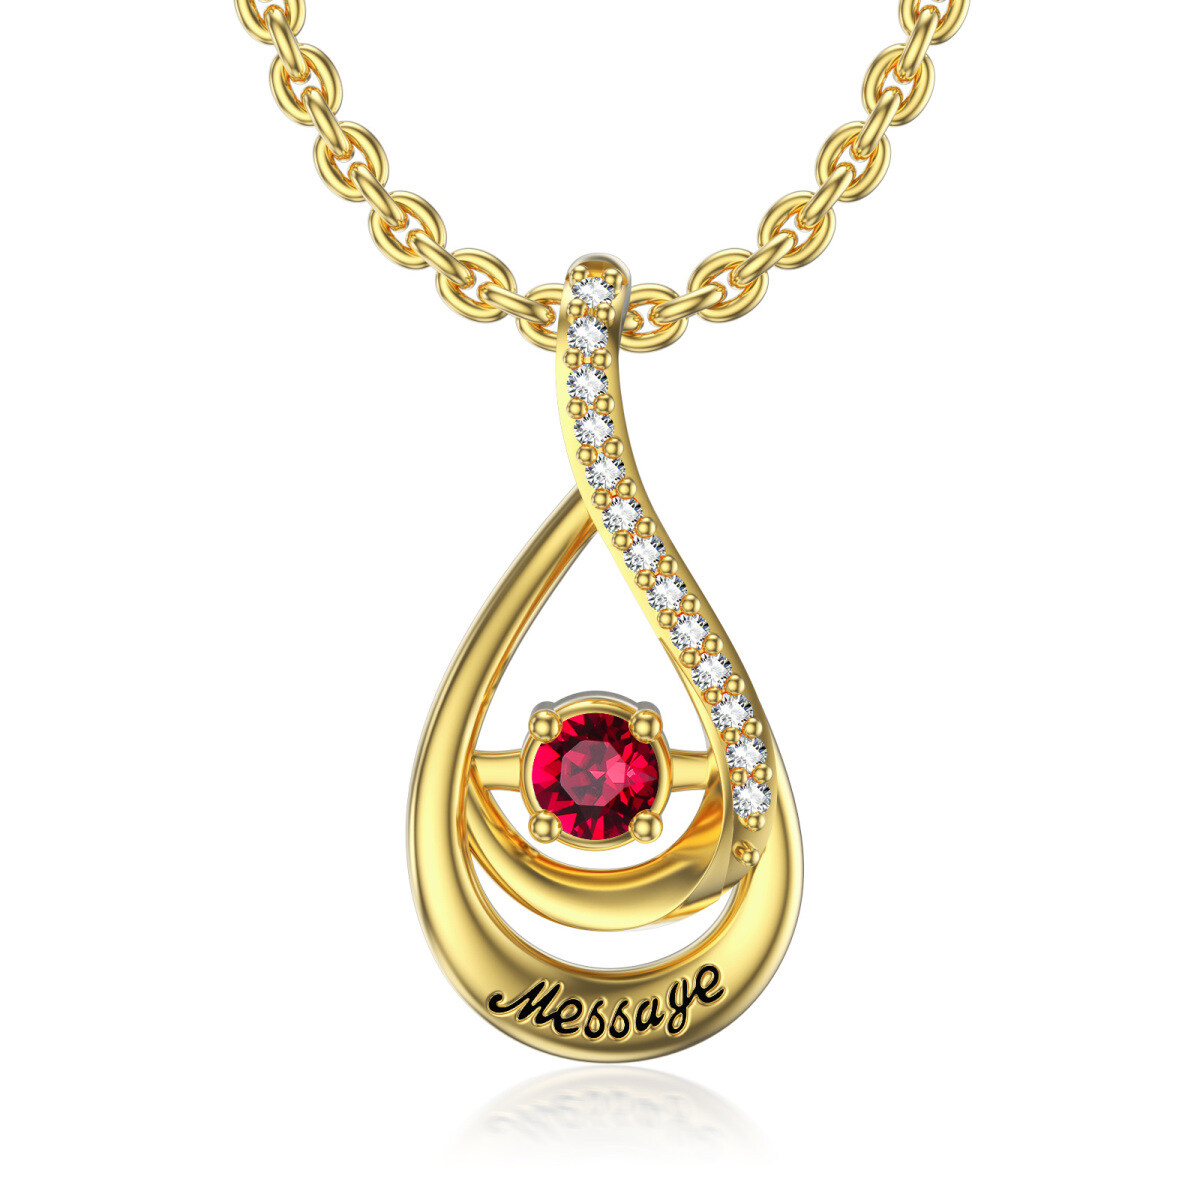 10K Gold Heart Shaped Cubic Zirconia Personalized Birthstone Pendant Necklace-1